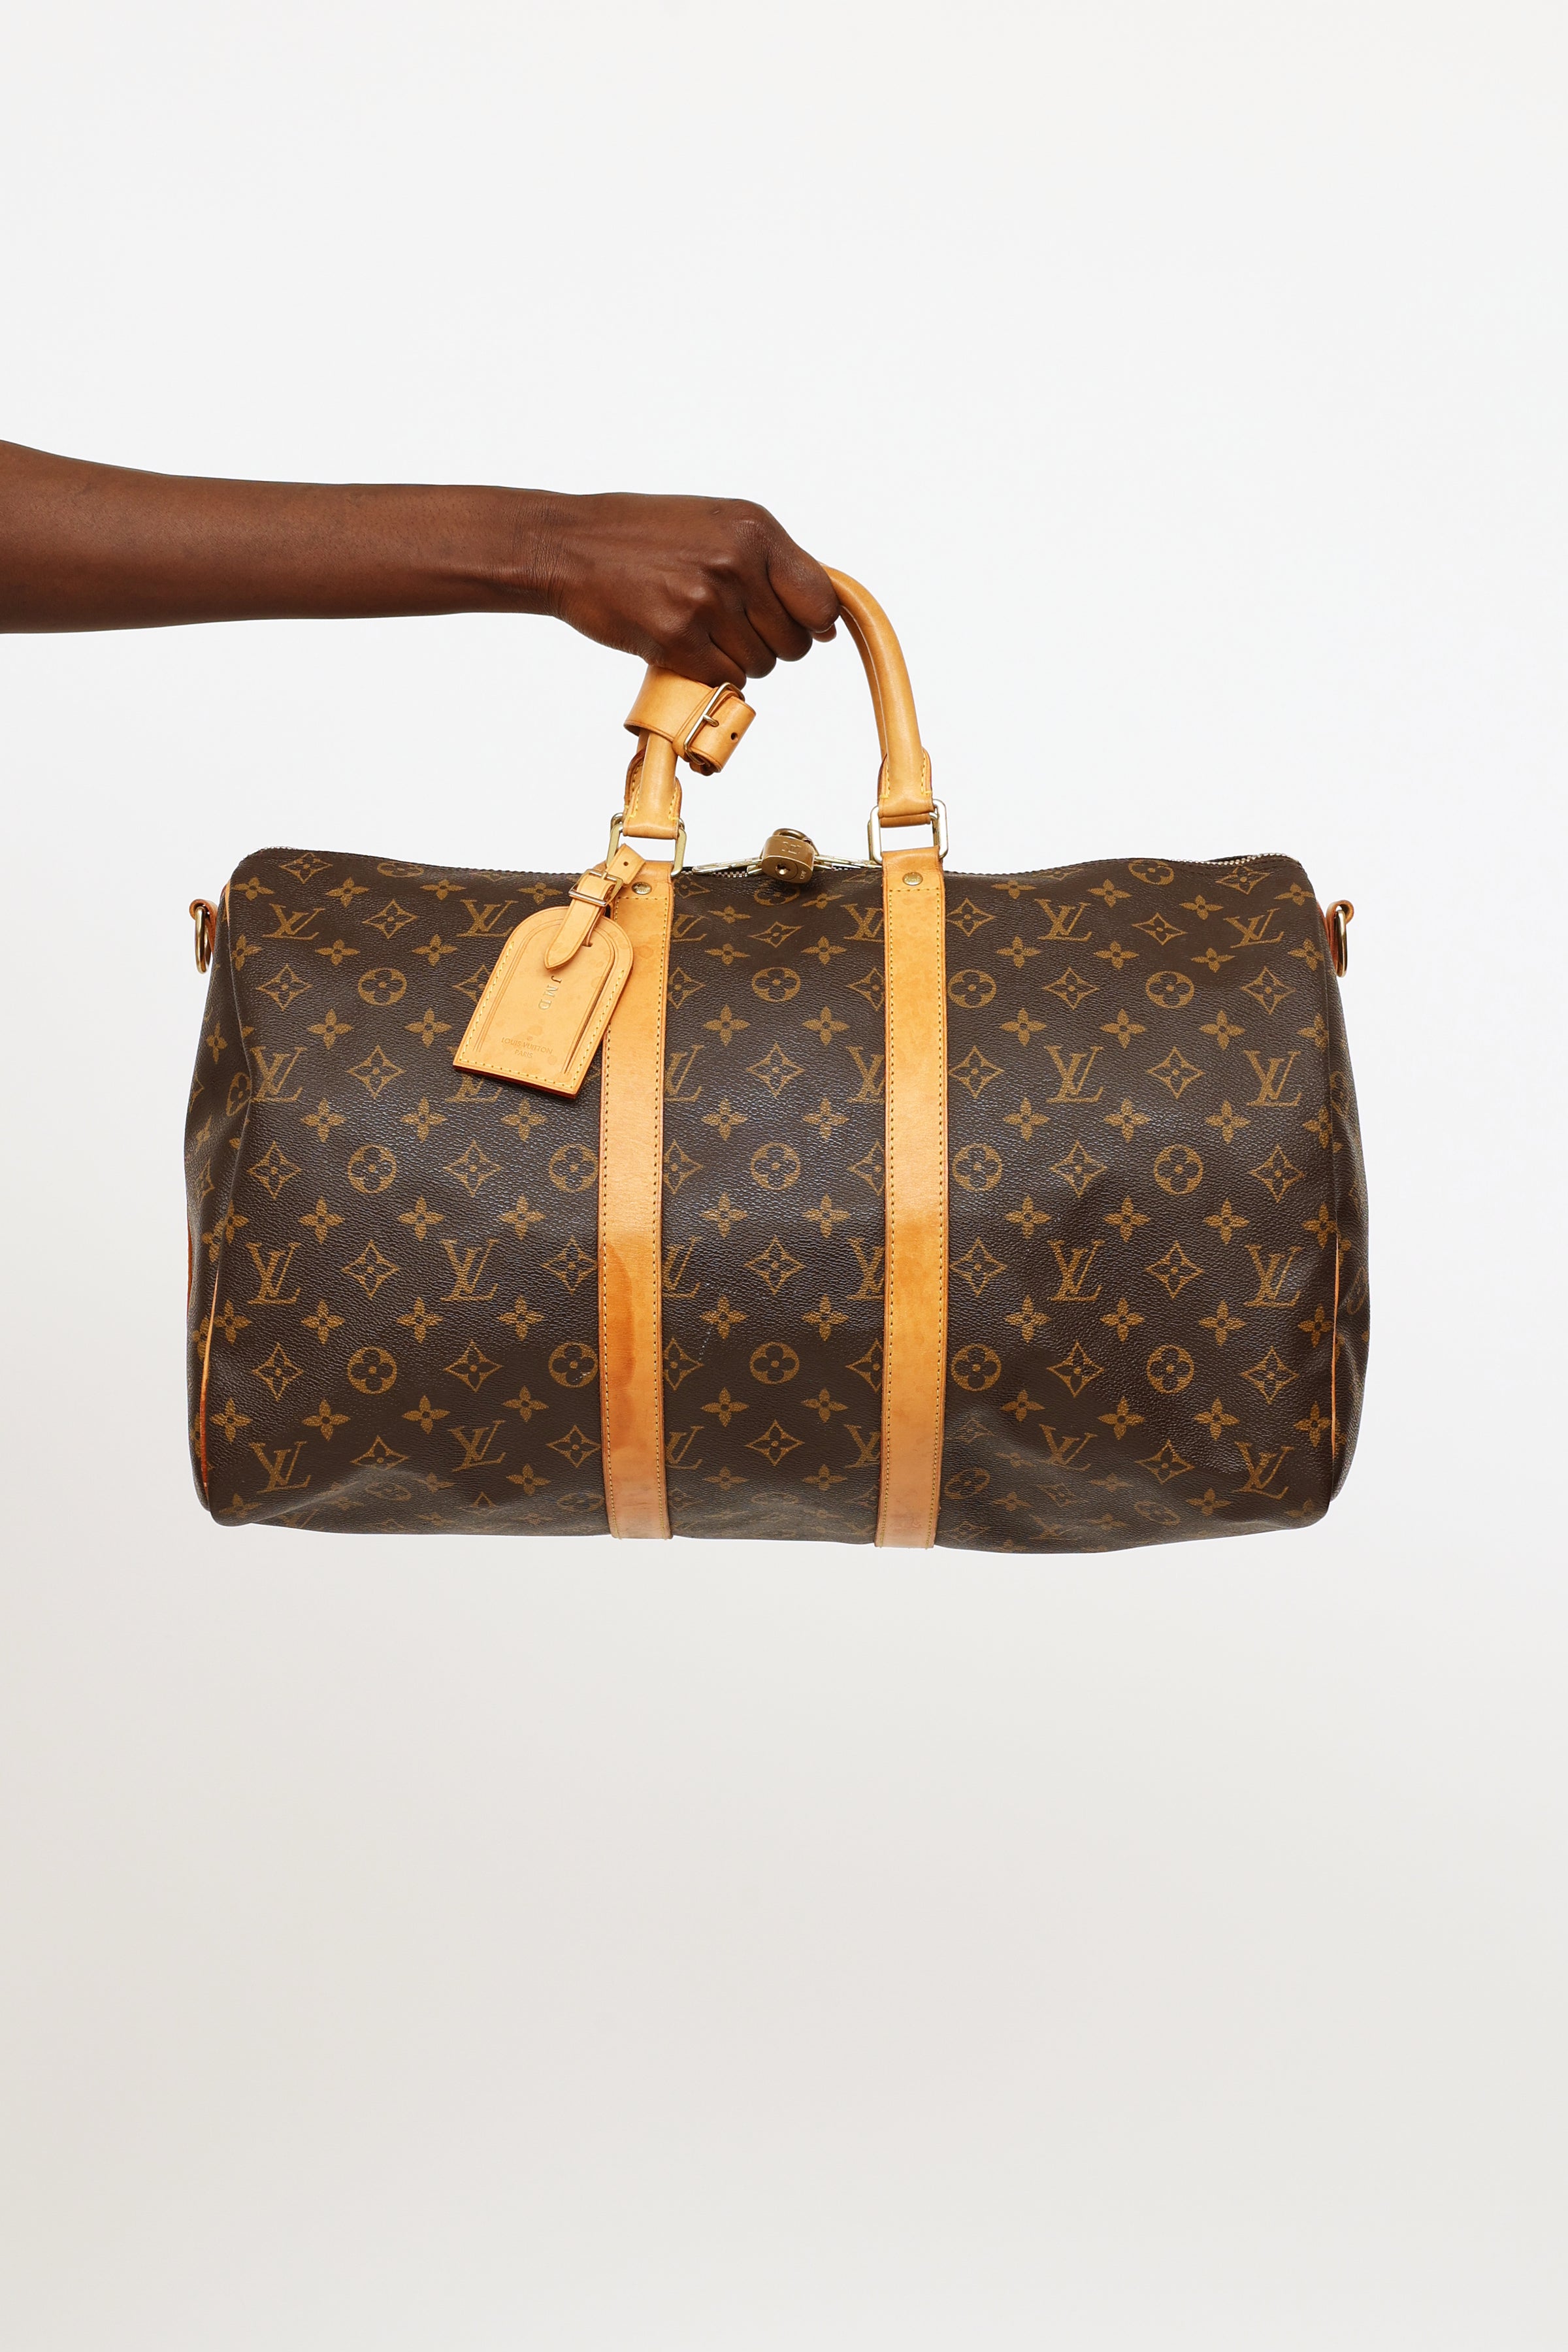 Louis+Vuitton+Keepall+Bandouliere+Duffle+45+Brown+Canvas for sale online